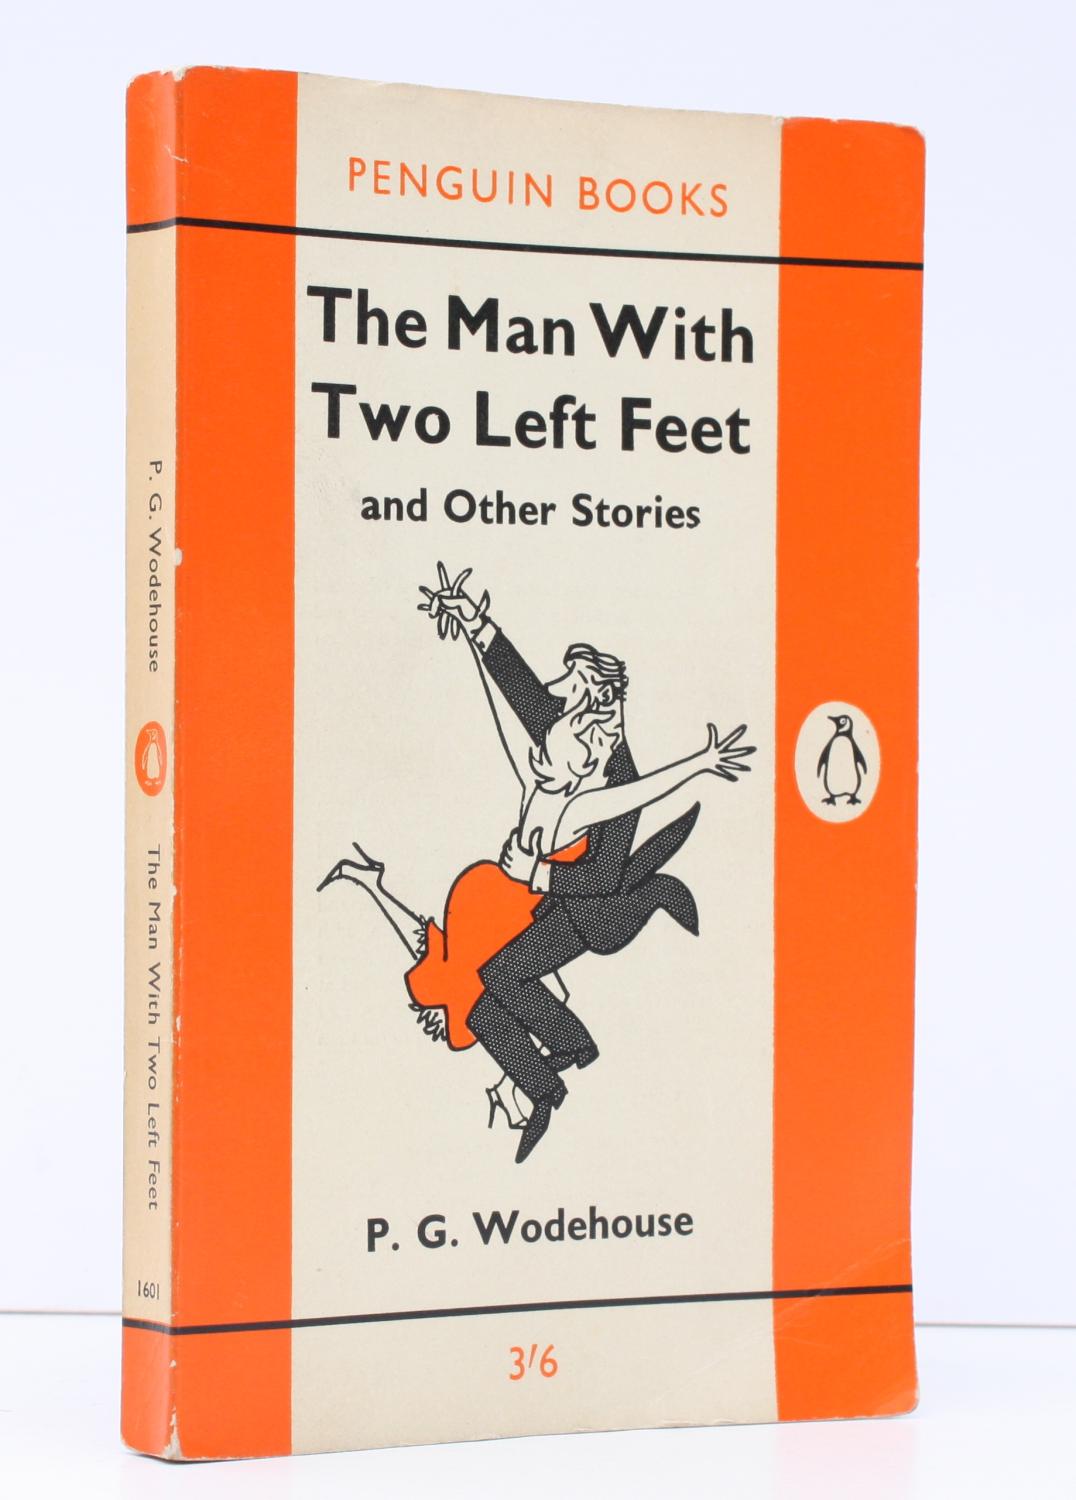 The Man with Two Left Feet and other Stories. FIRST APPEARANCE IN PENGUIN  by WODEHOUSE P. G.: (1961)